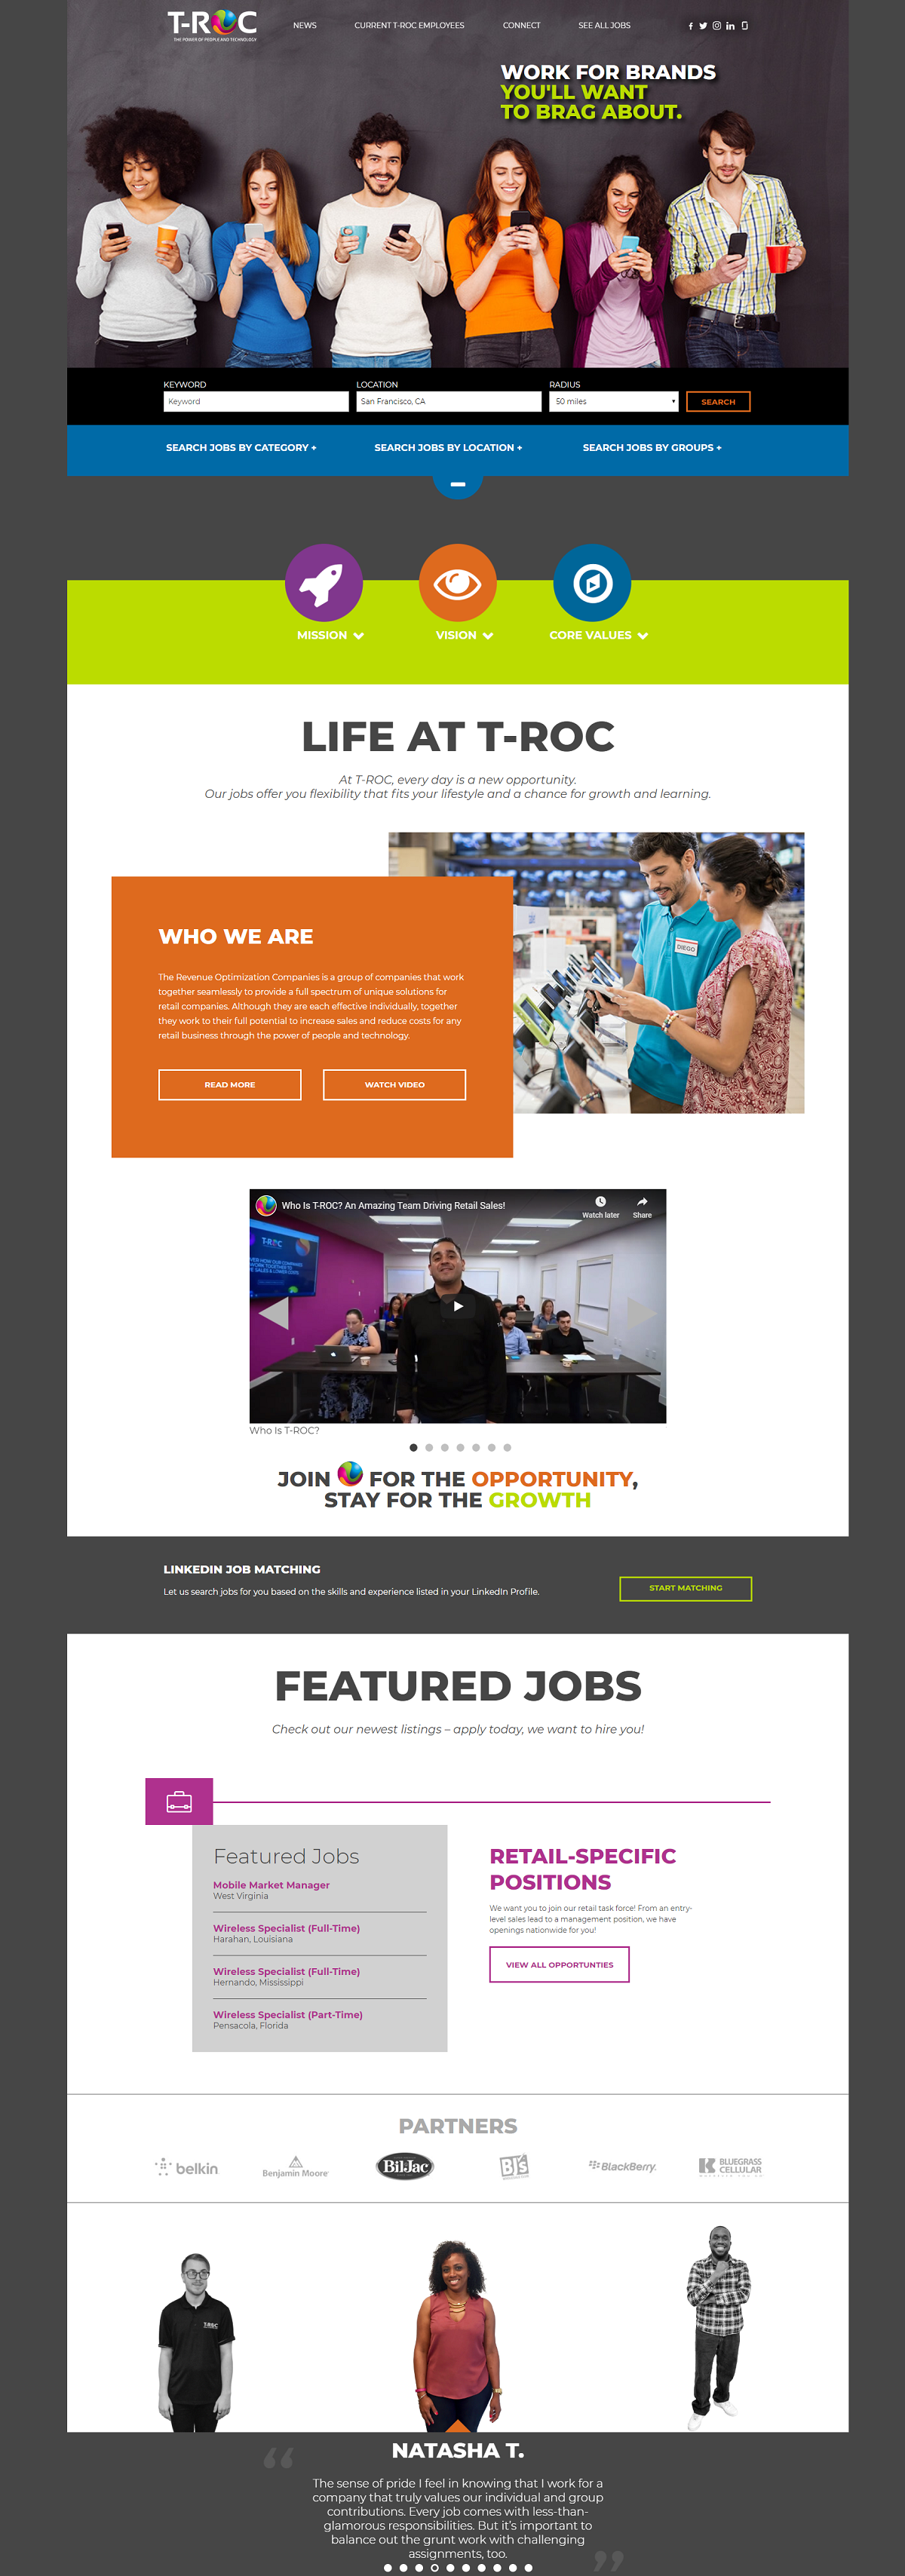 T-roc company career page